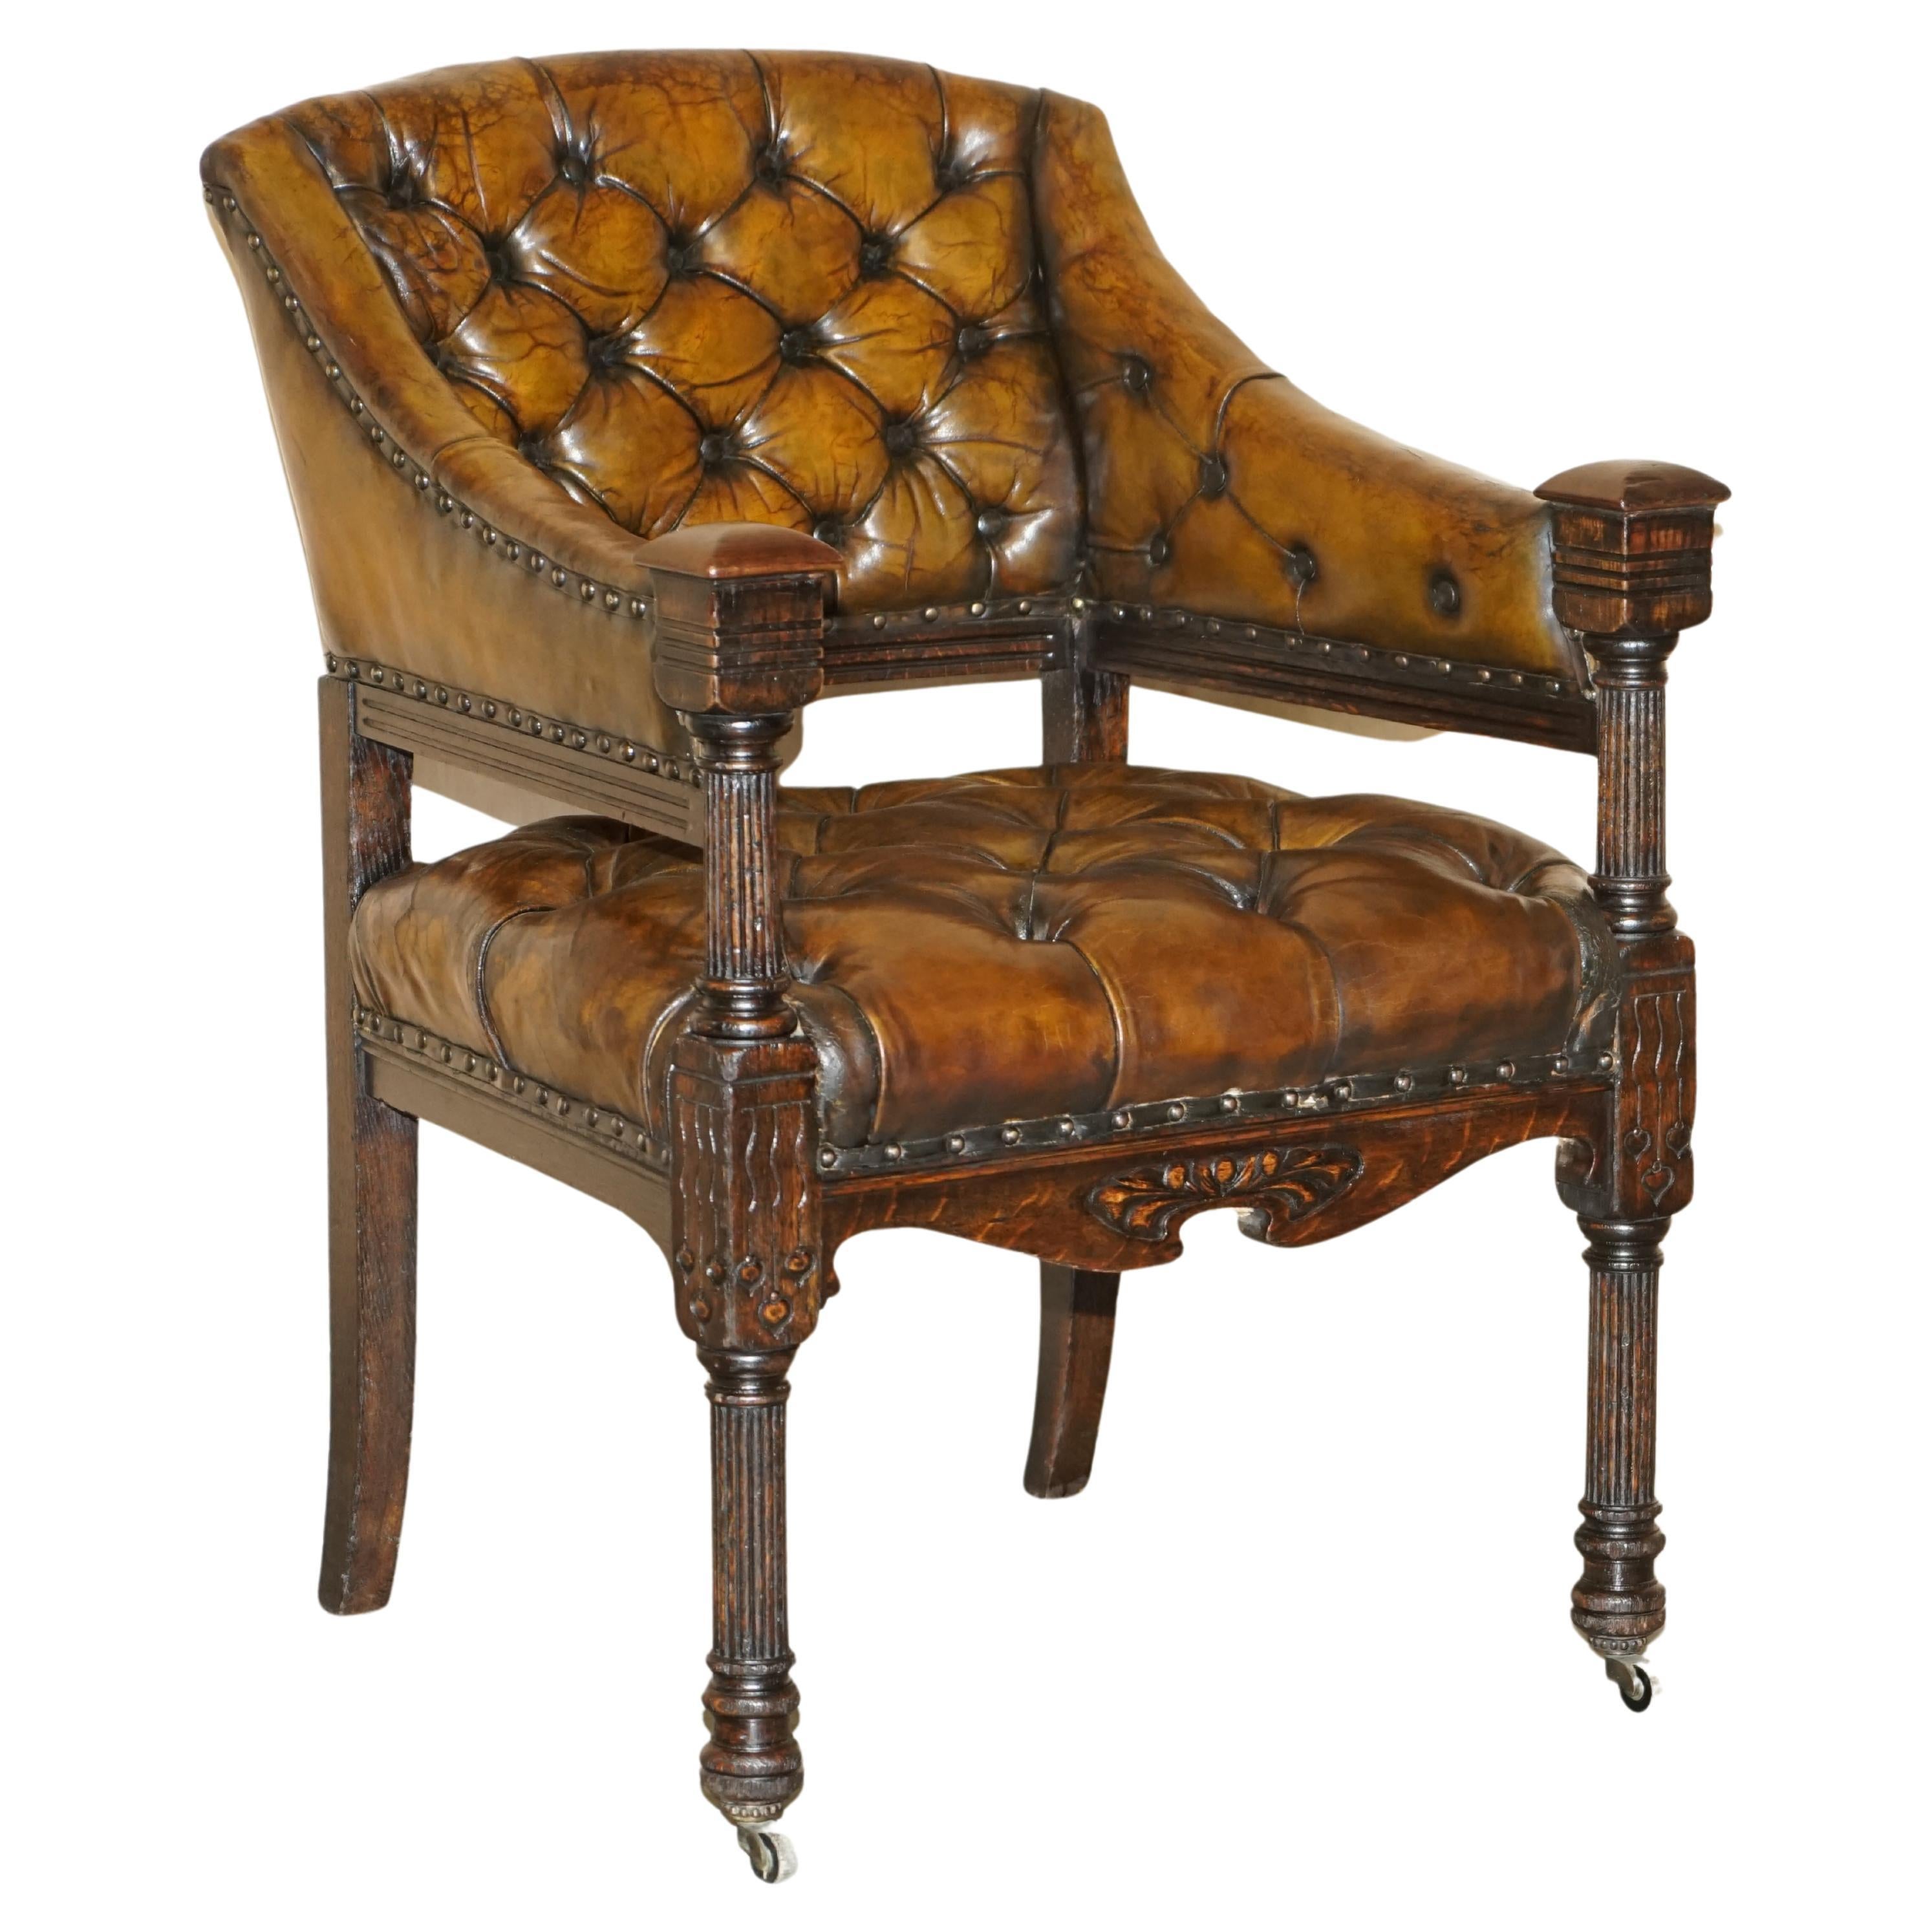 Antique 1880 Art Nouveau Carved Fully Restored Brown Leather Library Desk Chair For Sale